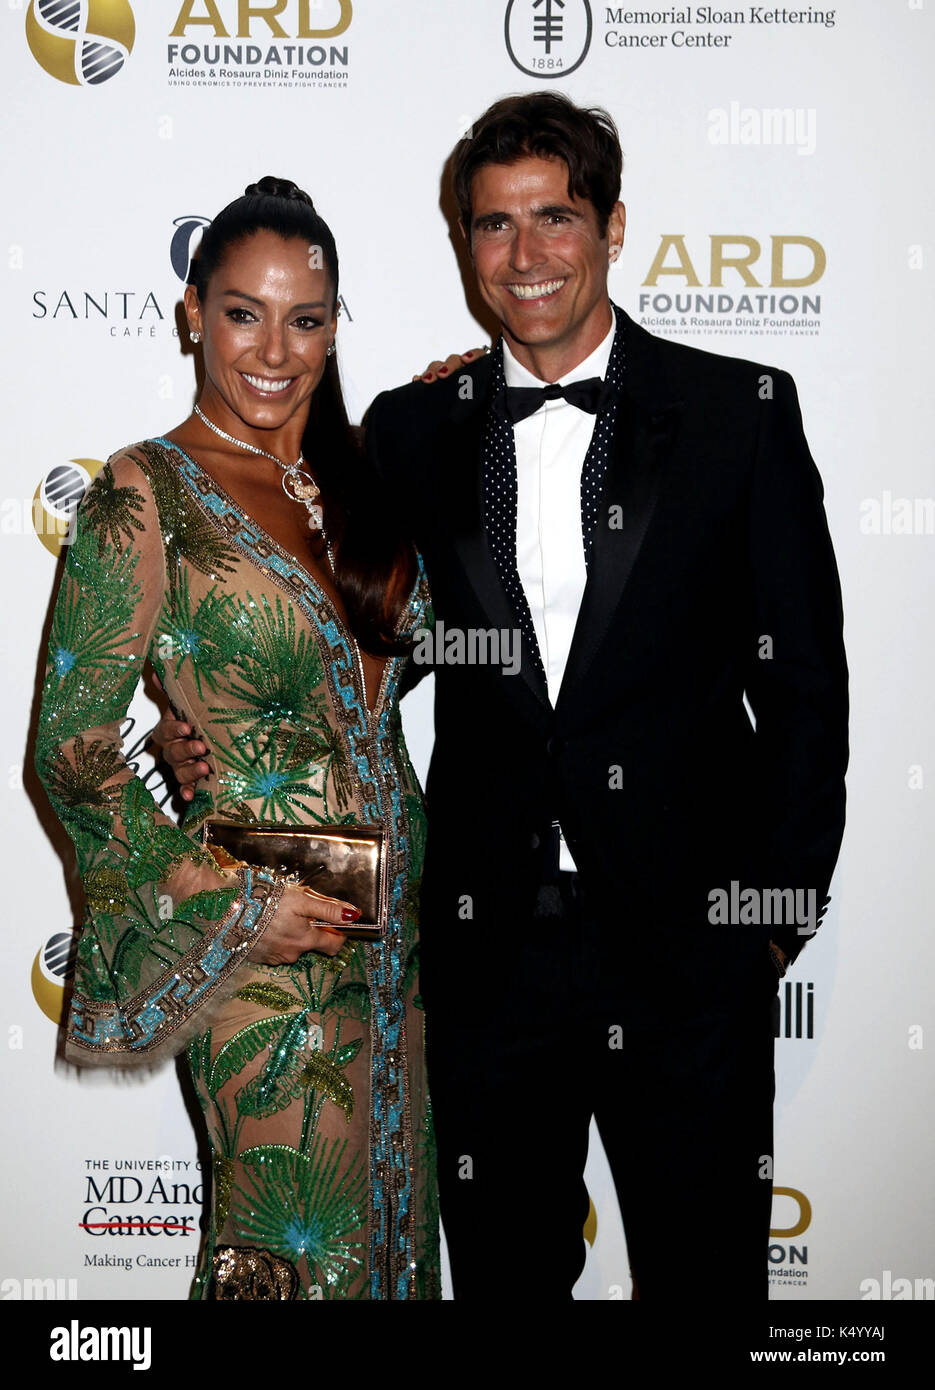 New York, New York, USA. 7th Sep, 2017. ARD founder ANA PAOLA DINIZ and actor REYNALDO GIANECCHINI attend The Alcides & Rosaura Diniz (ARD) Foundation's first fundraising gala, benefiting Memorial Sloan Kettering Cancer Center held at Cipriani 42nd Street. Credit: Nancy Kaszerman/ZUMA Wire/Alamy Live News Stock Photo